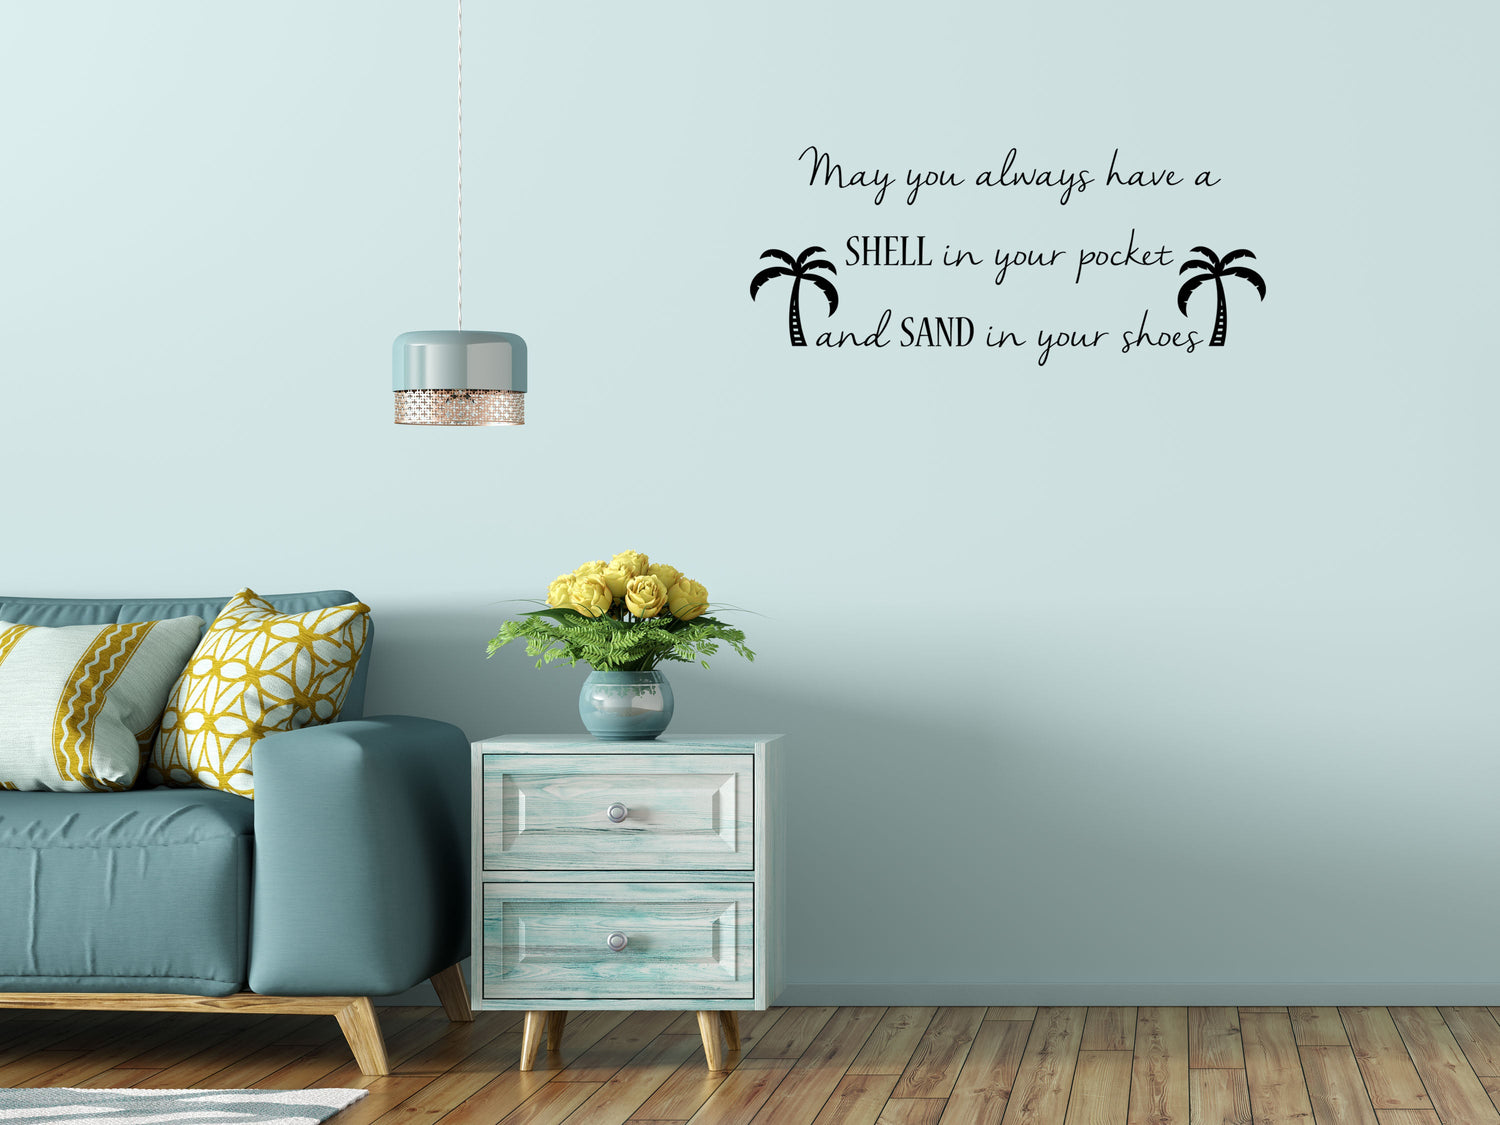 Shell In Your Pocket - Inspirational Wall Decals Vinyl Wall Decal Inspirational Wall Signs 